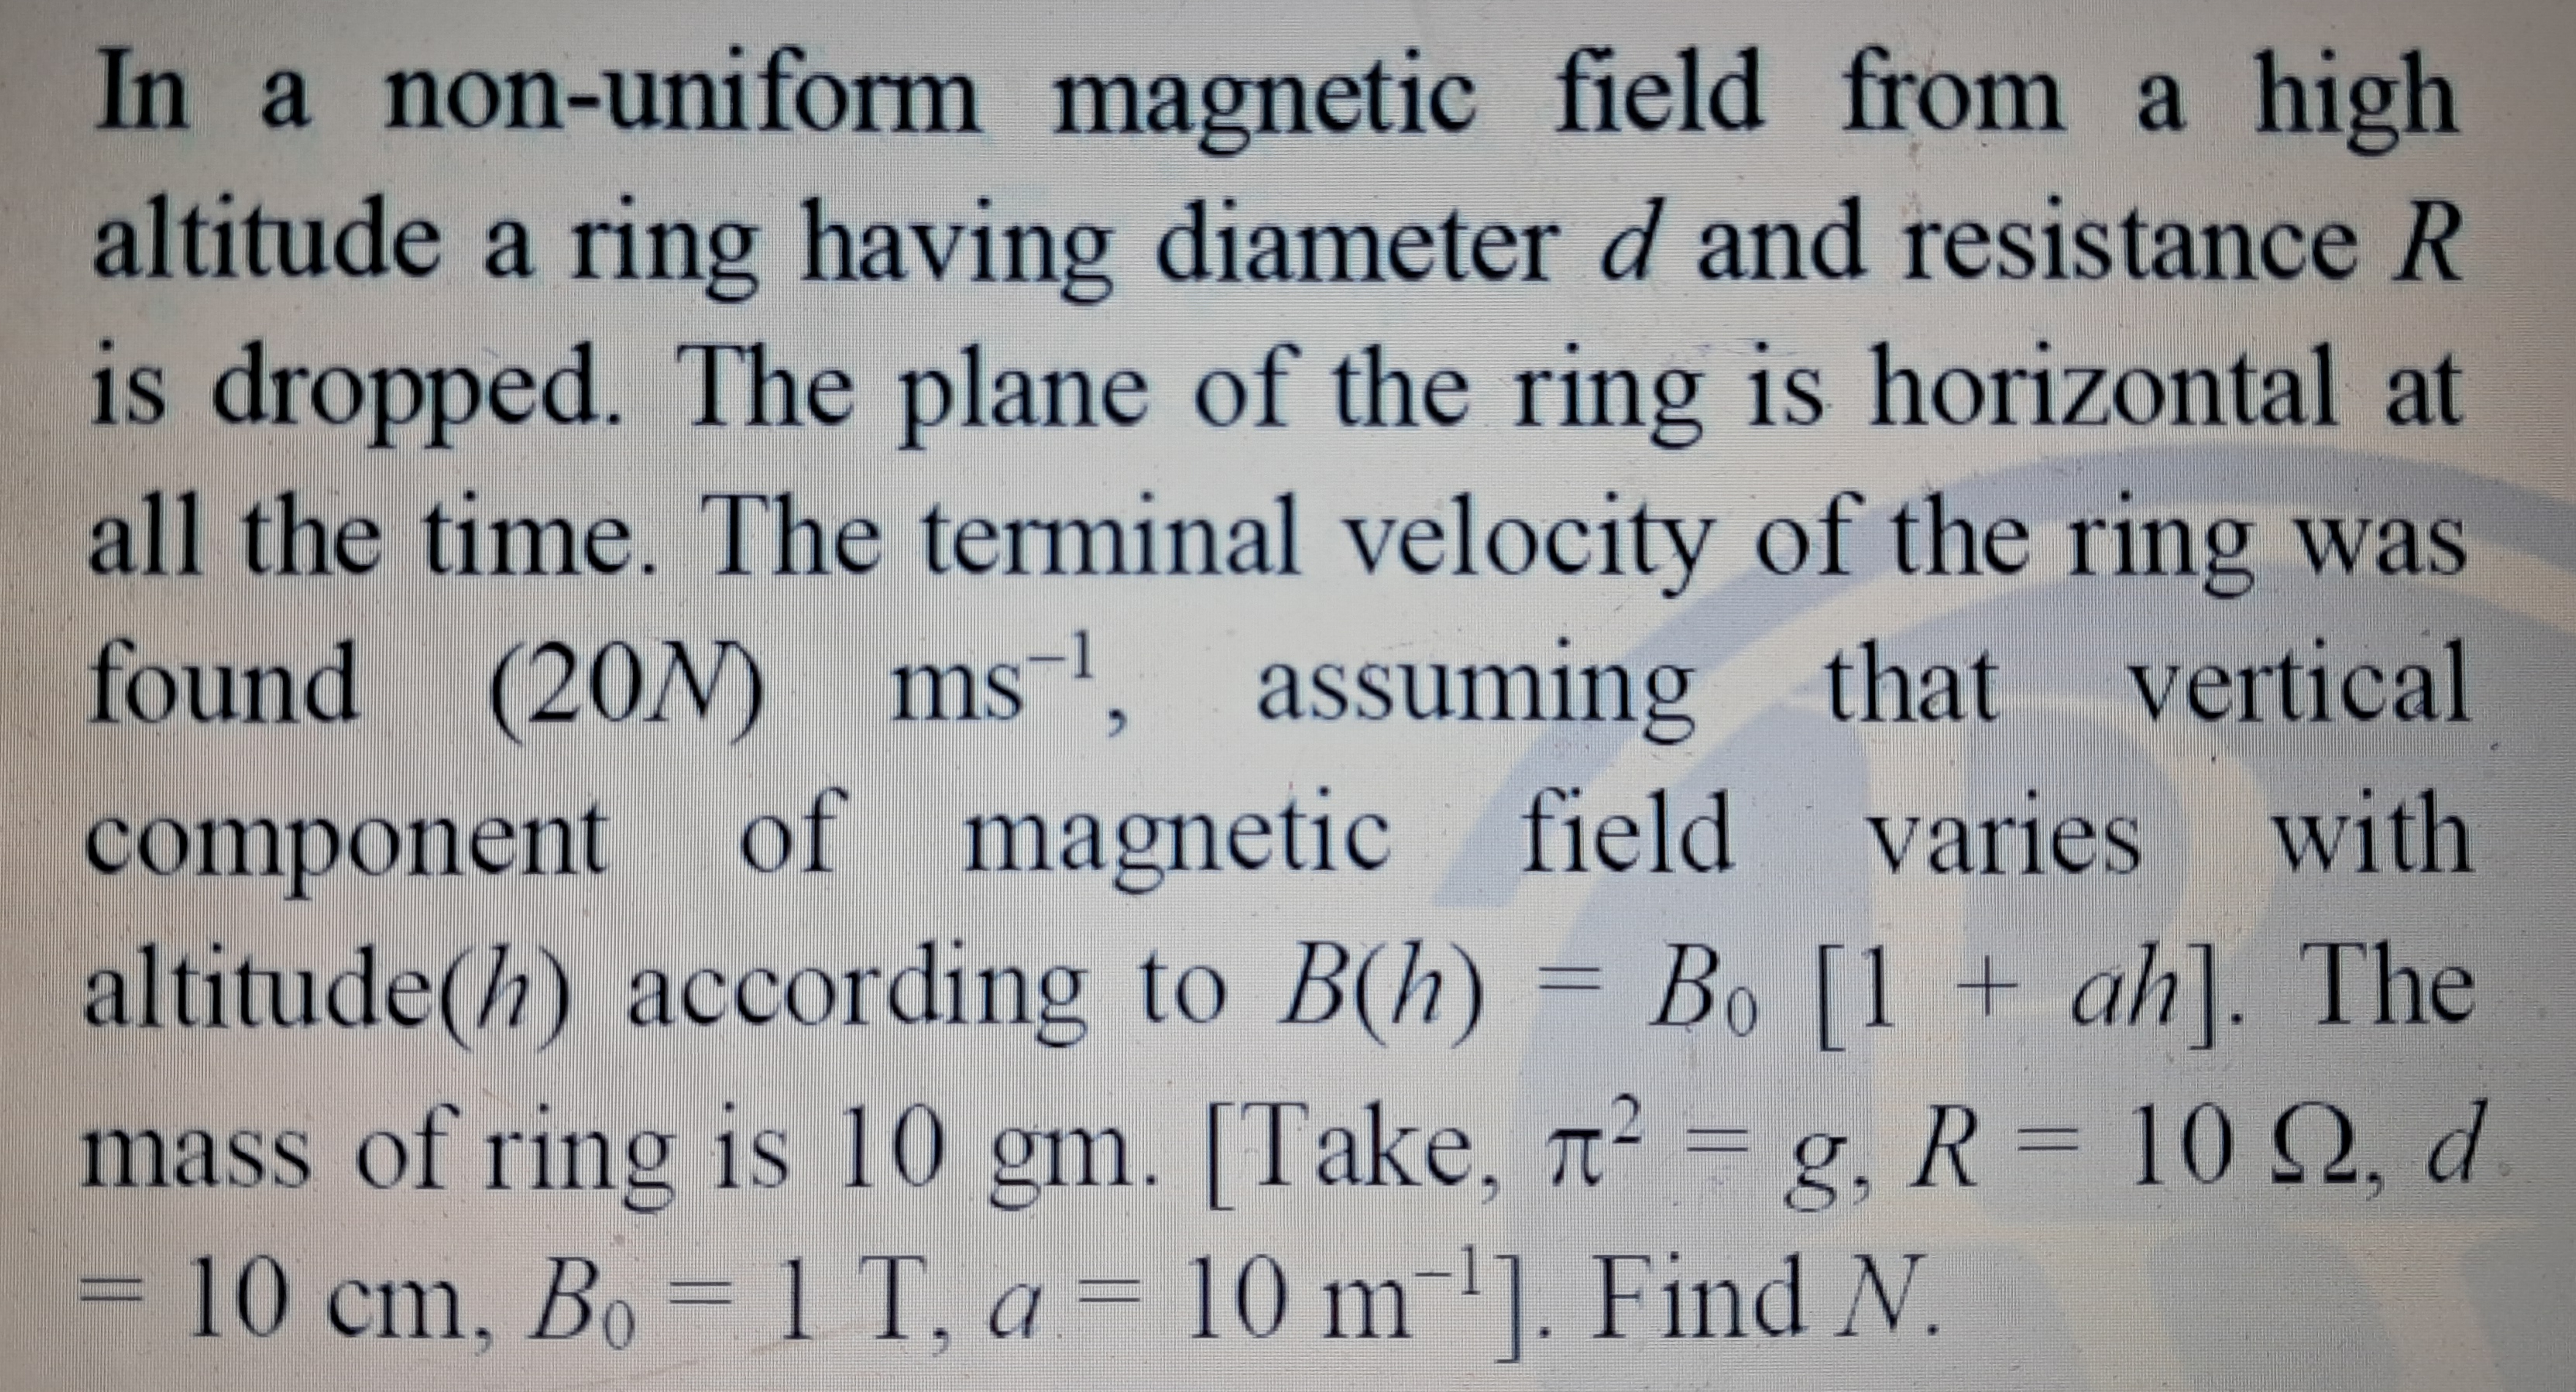 In a non-uniform magnetic field from a high altitude a ring having dia